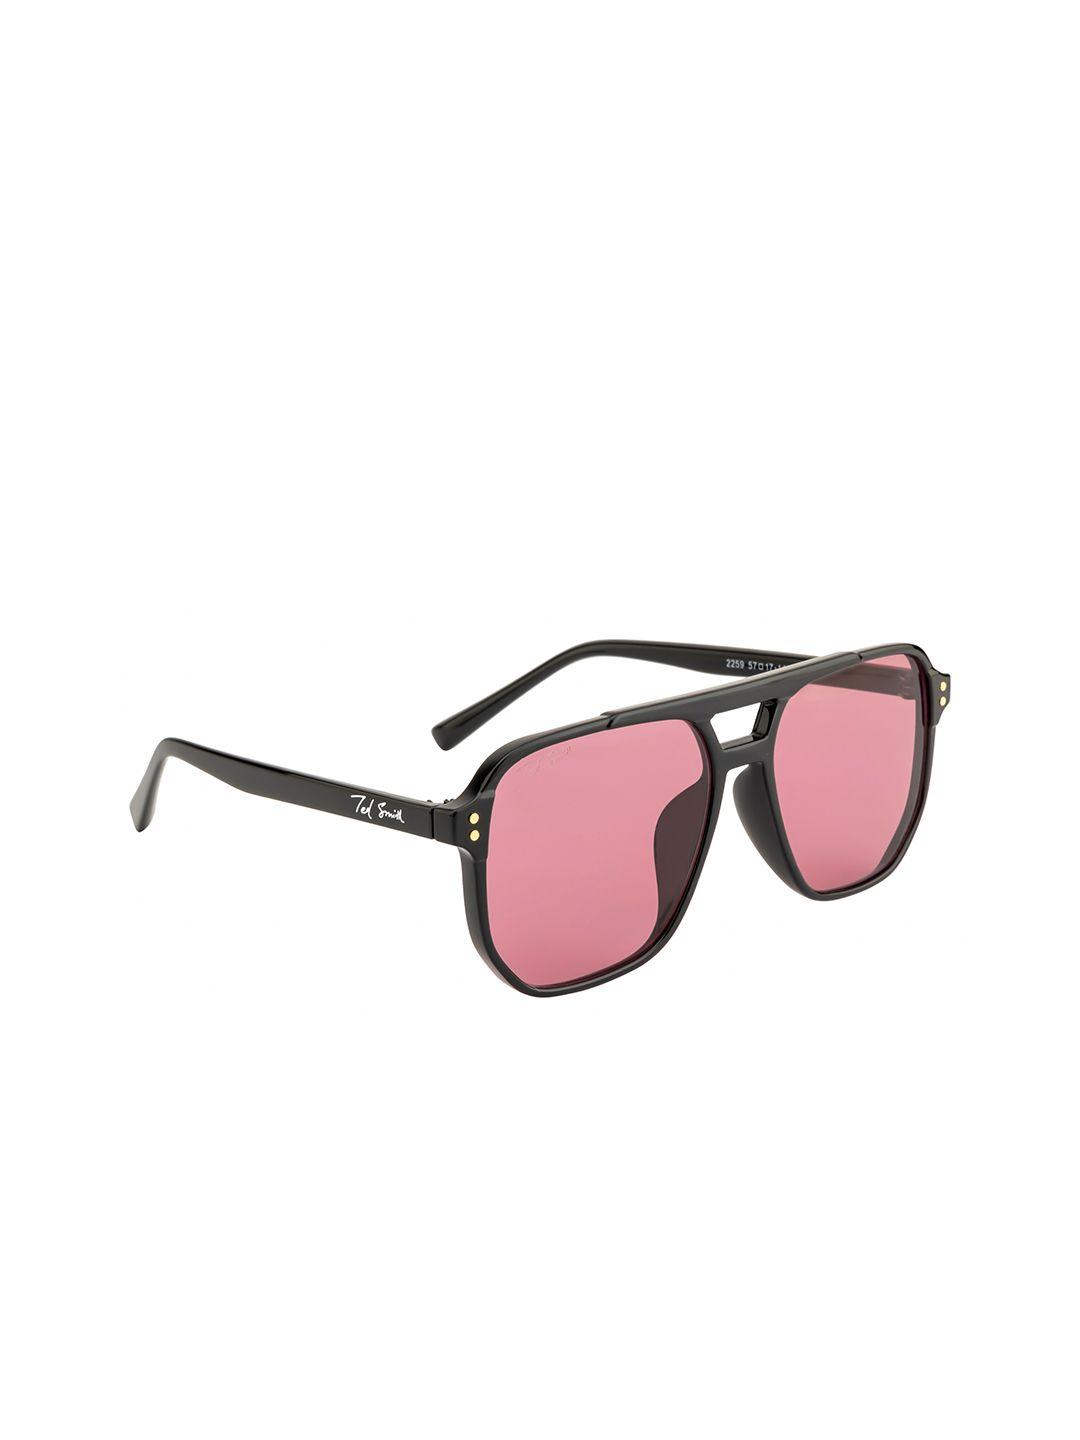 ted smith unisex pink lens & black aviator sunglasses with uv protected lens